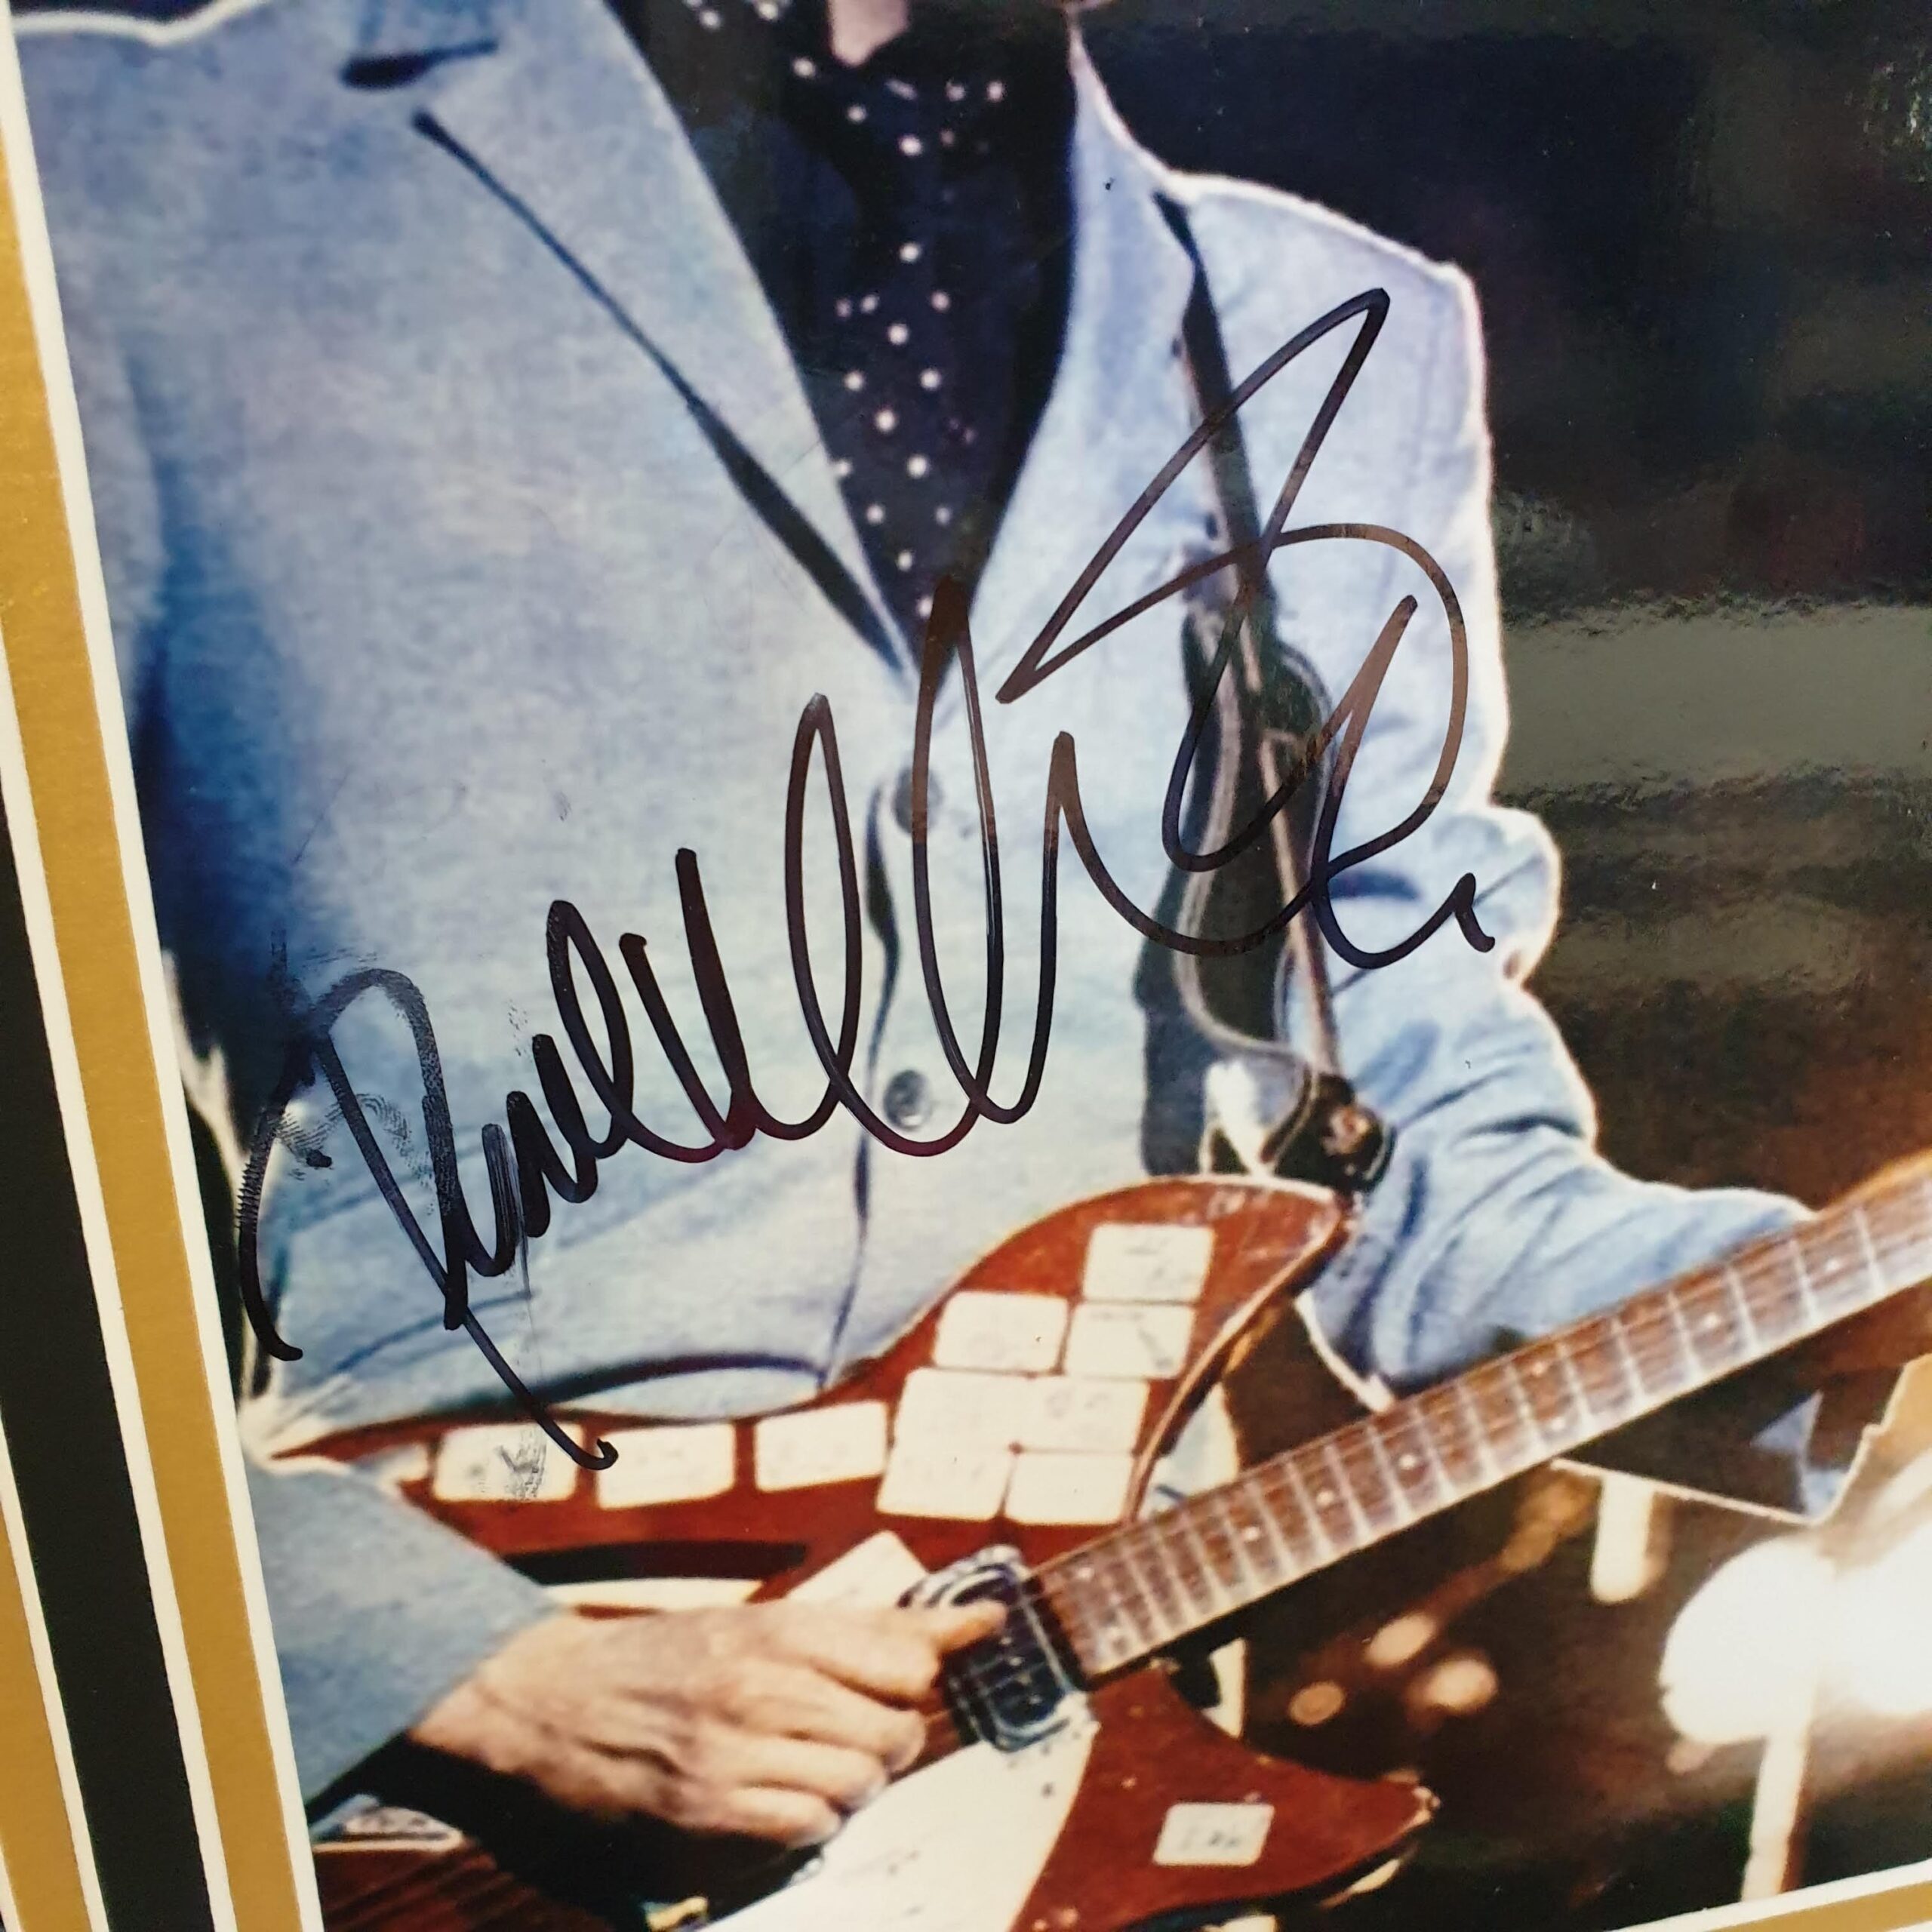 Paul Weller Signed Picture